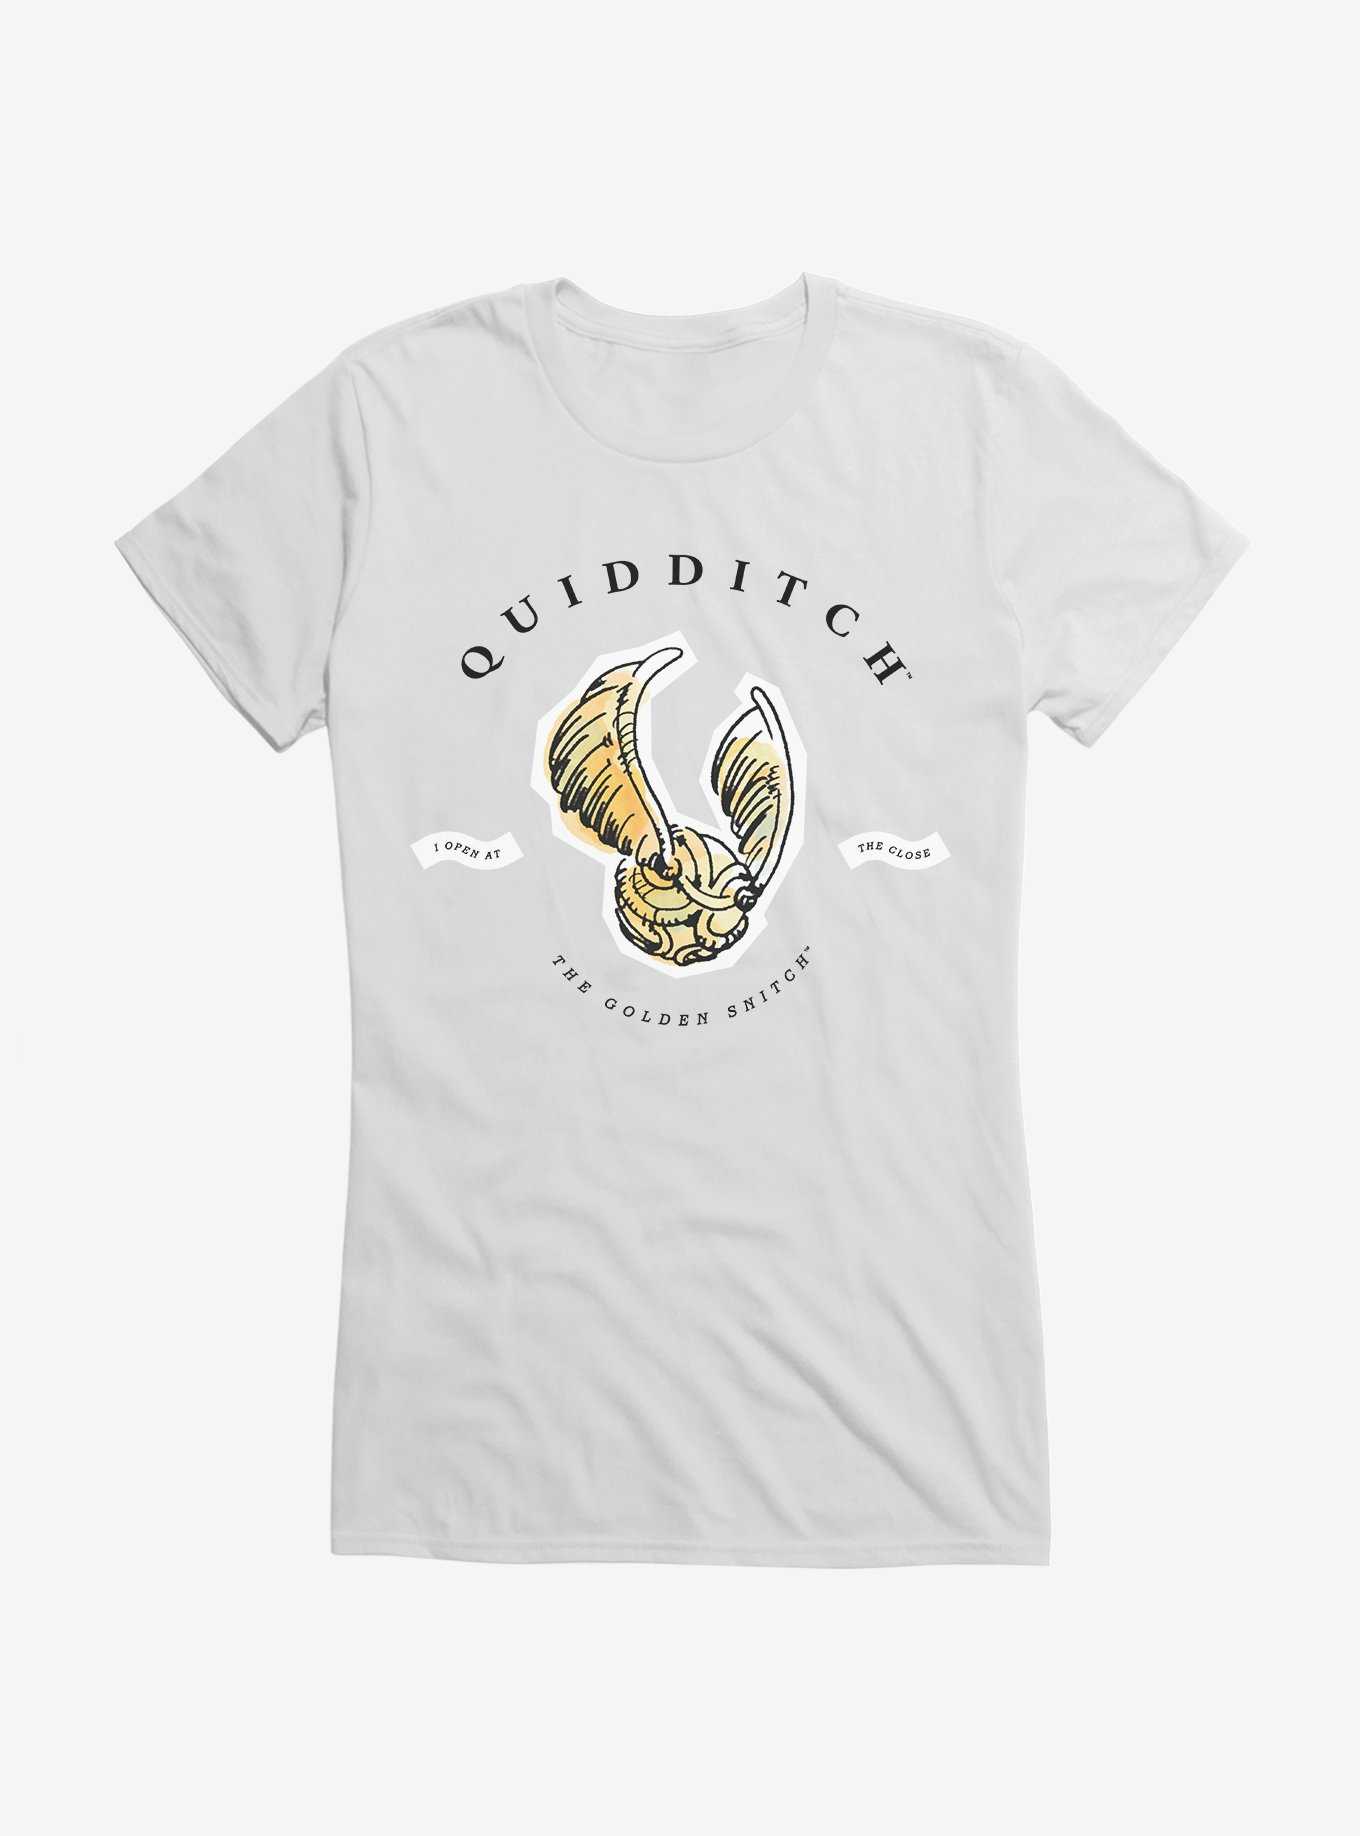 OFFICIAL Harry Potter Golden Snitch Shirts & Merch | Hot Topic